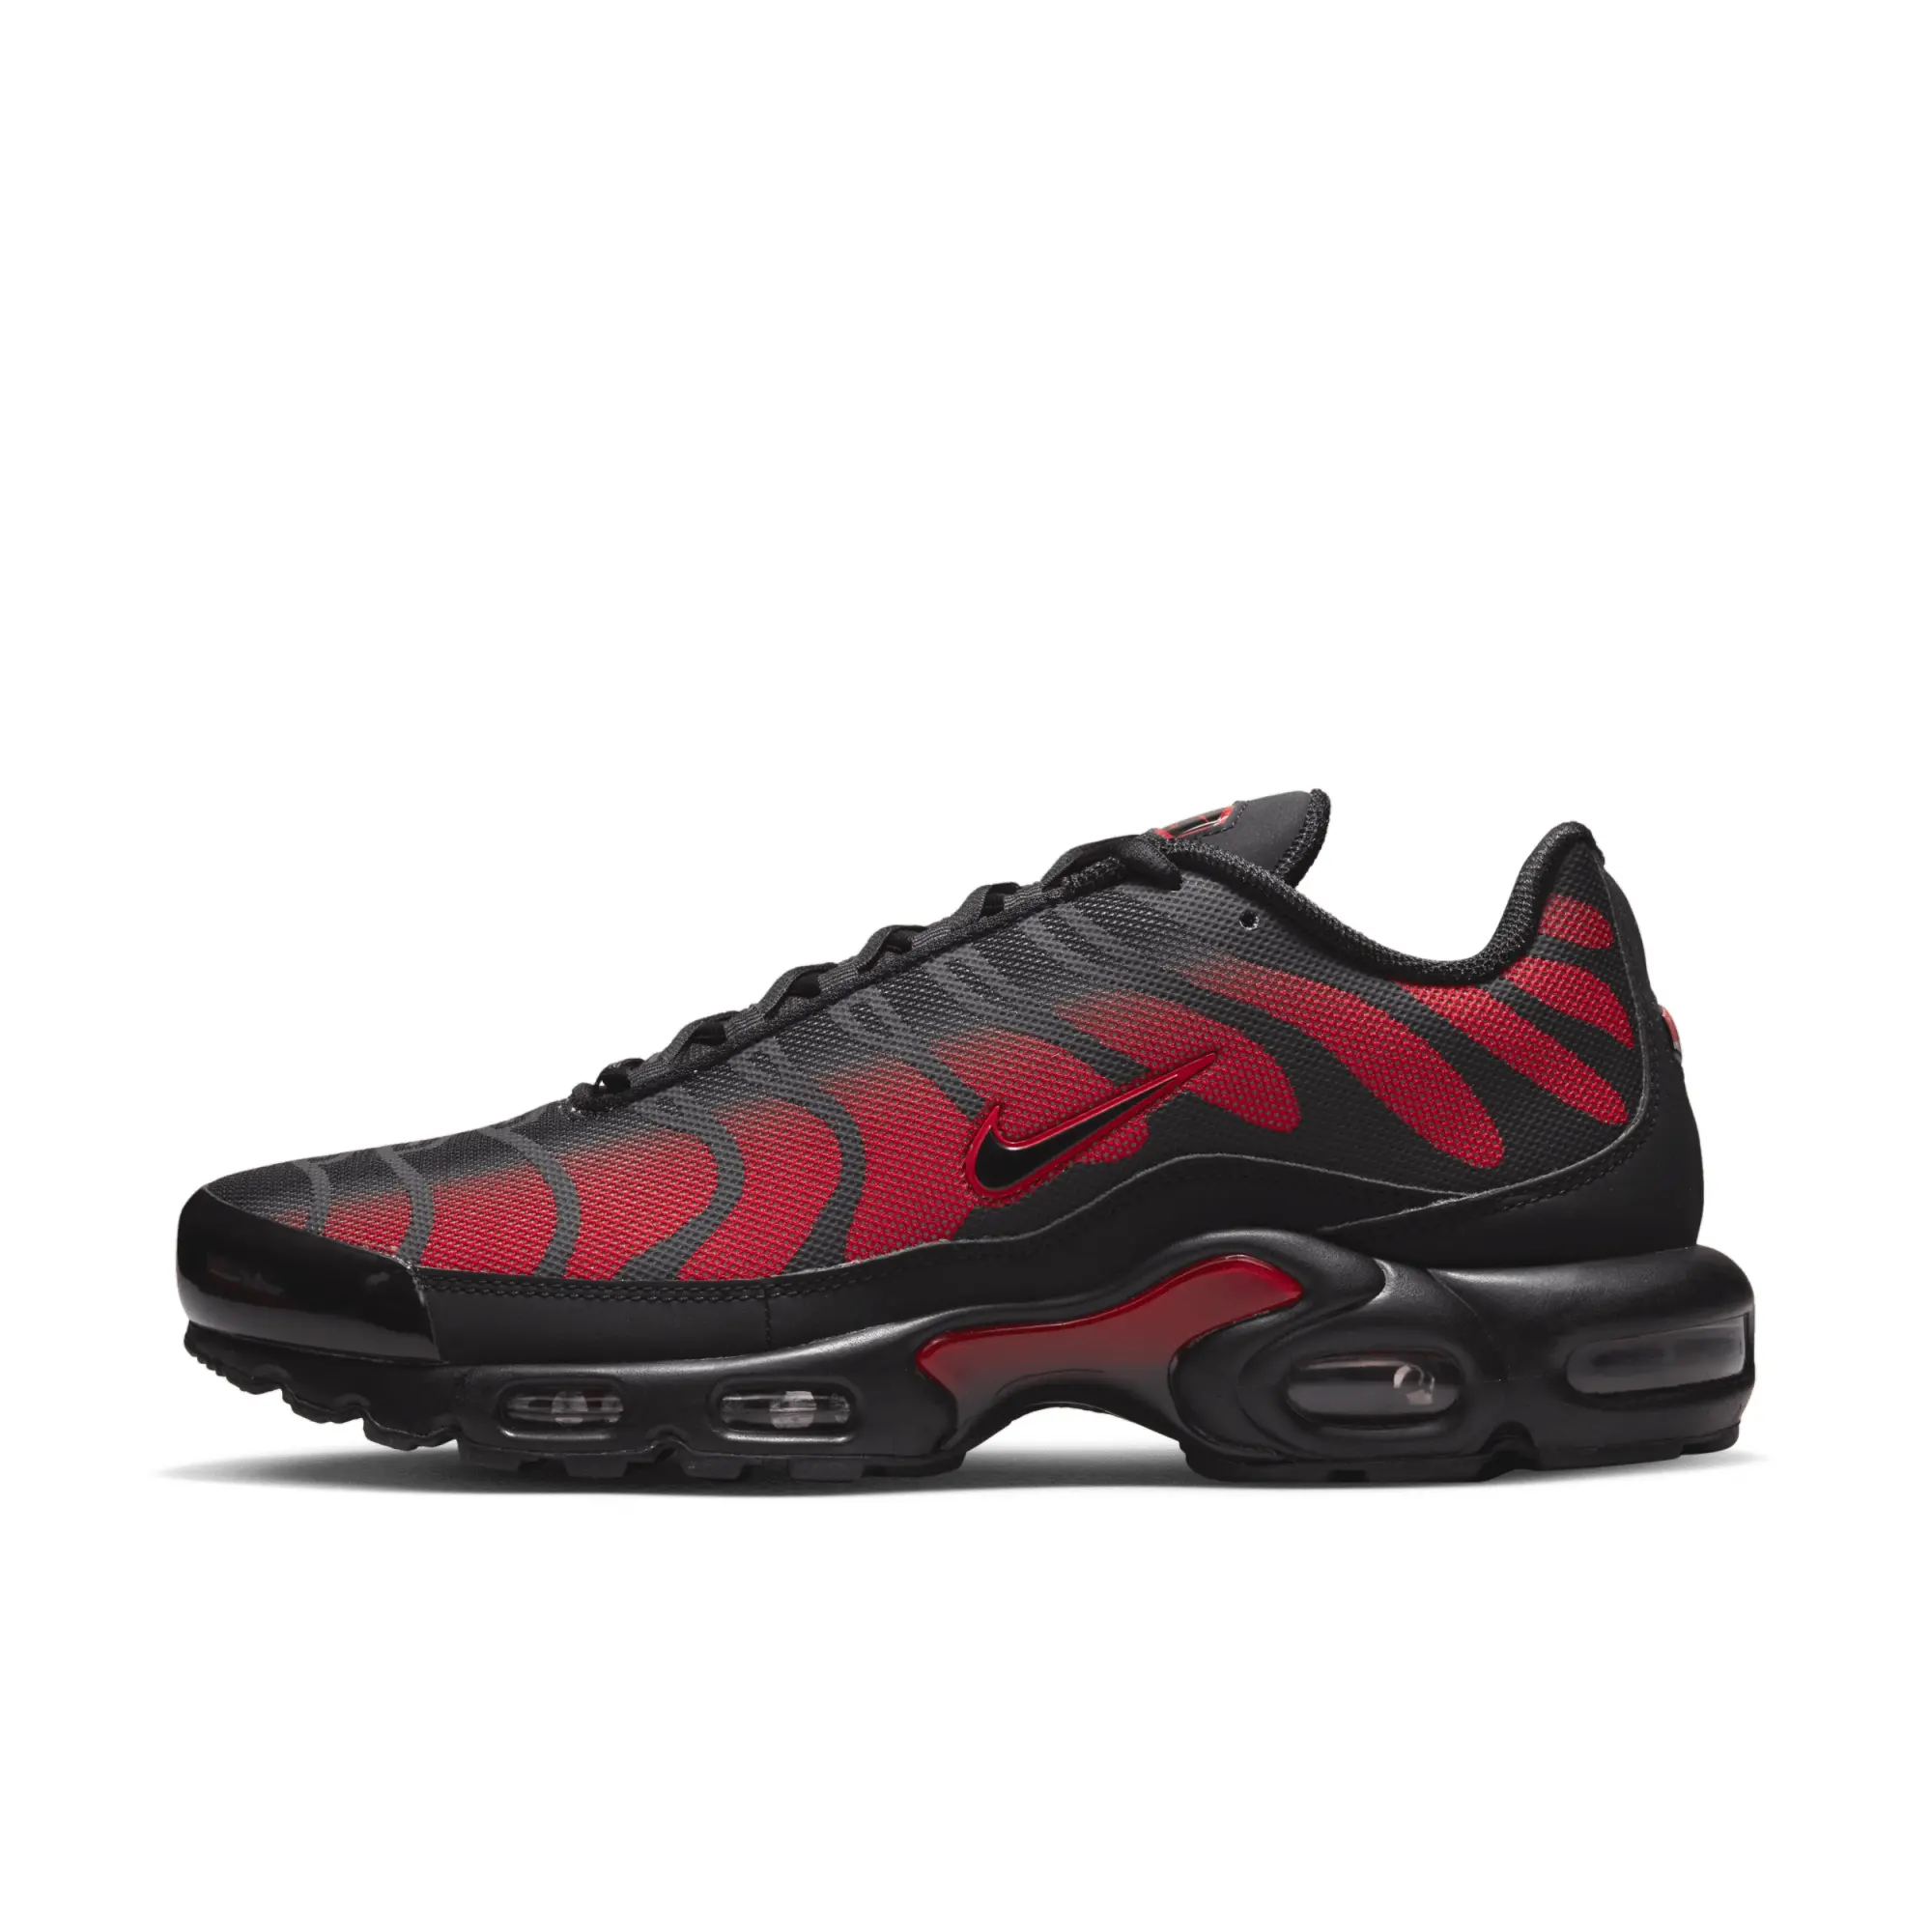 Nike Tuned 1 - Red